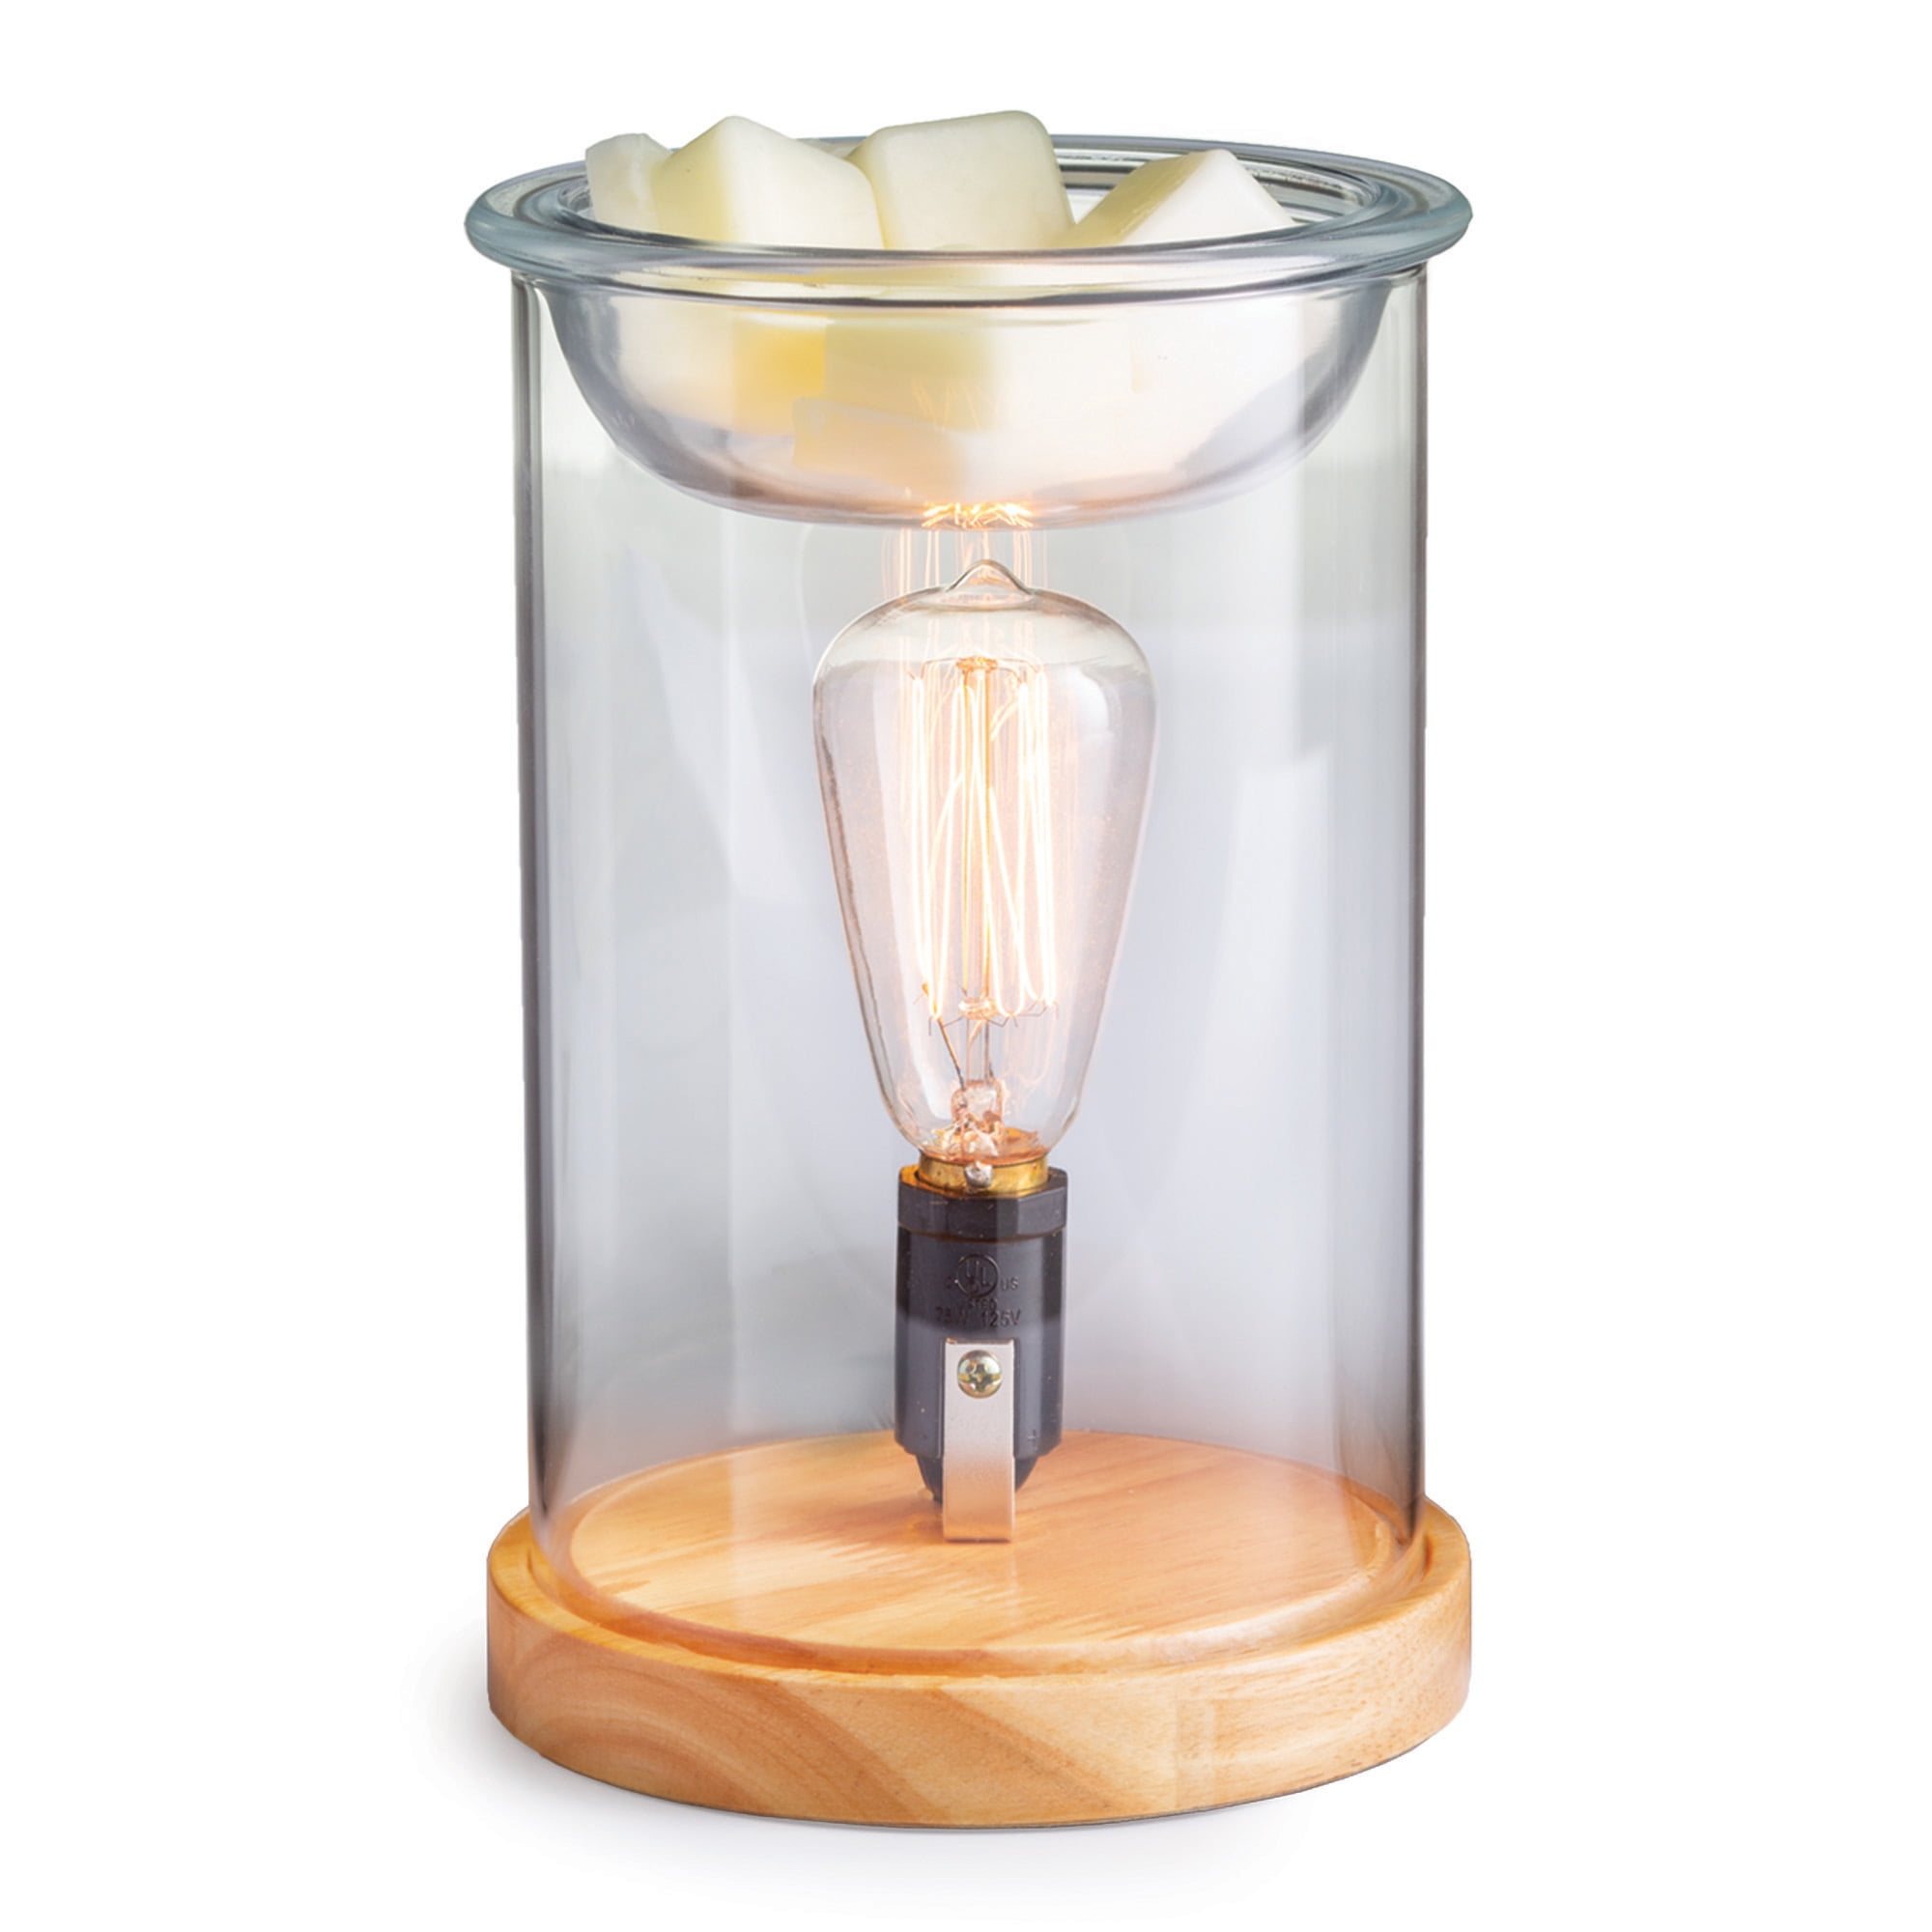 Vintage Bulb Electric Candle Warmer With Timer,for Scented Wax Melts,  Cubes, Tarts, Air Freshener Set For Rustic Home Dcor, Office, Gifts